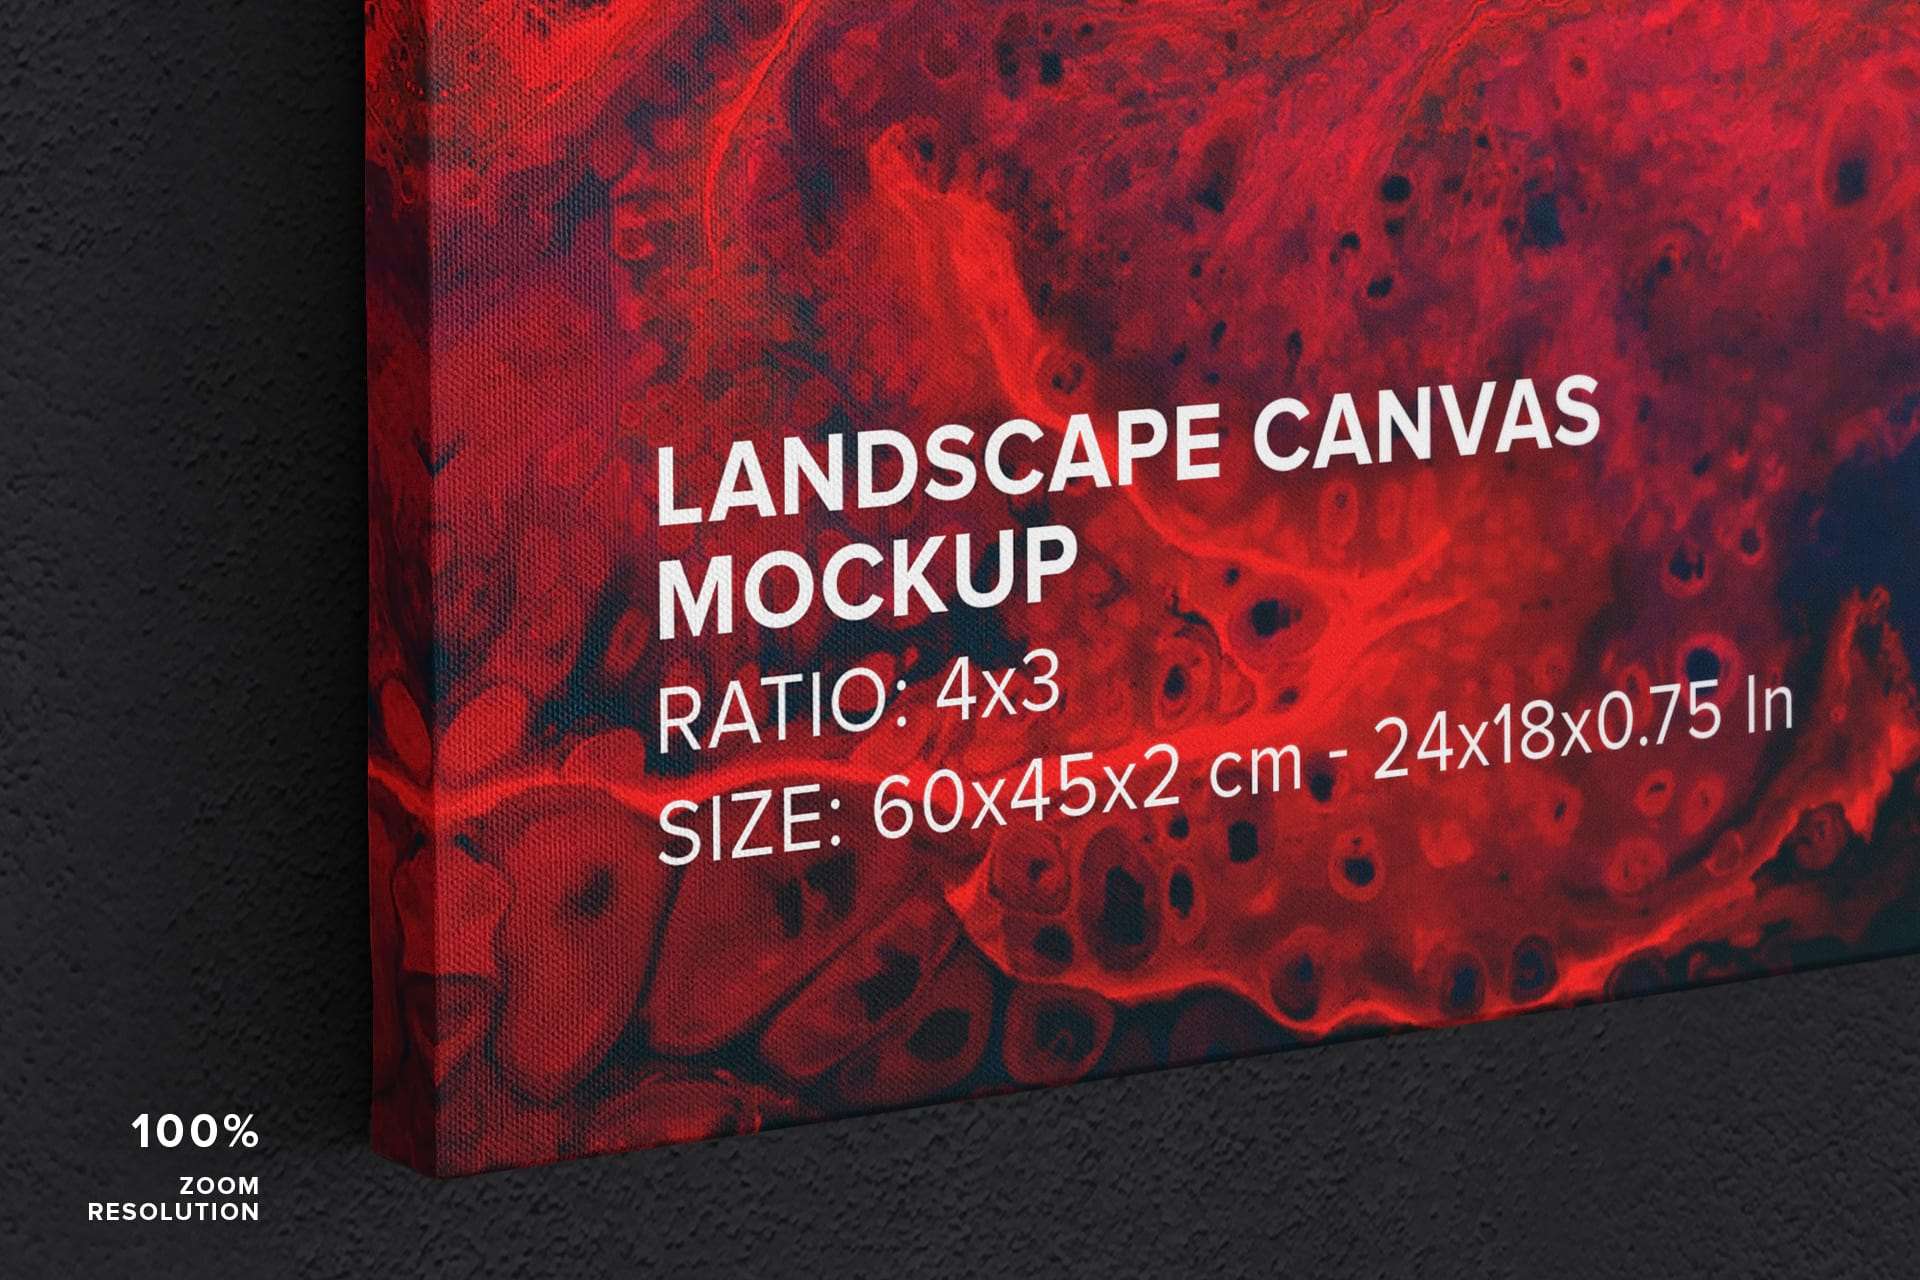 Art Wall Landscape Canvas Ratio 4x3 Mockup - Left 1.5 in Wrap View Zoom